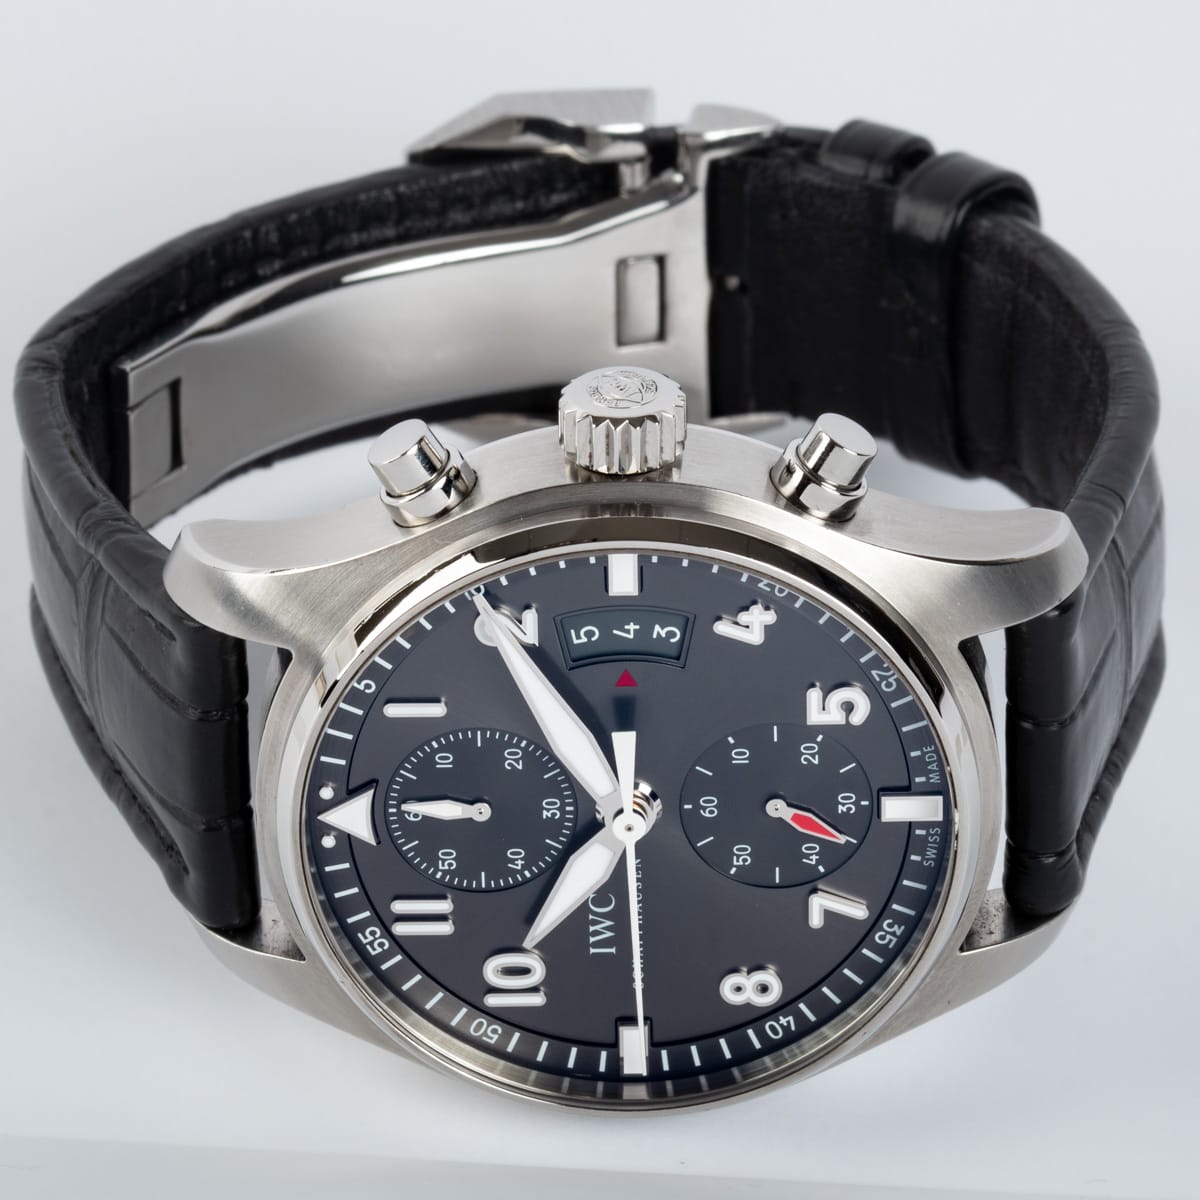 Front View of Spitfire Flyback Chronograph